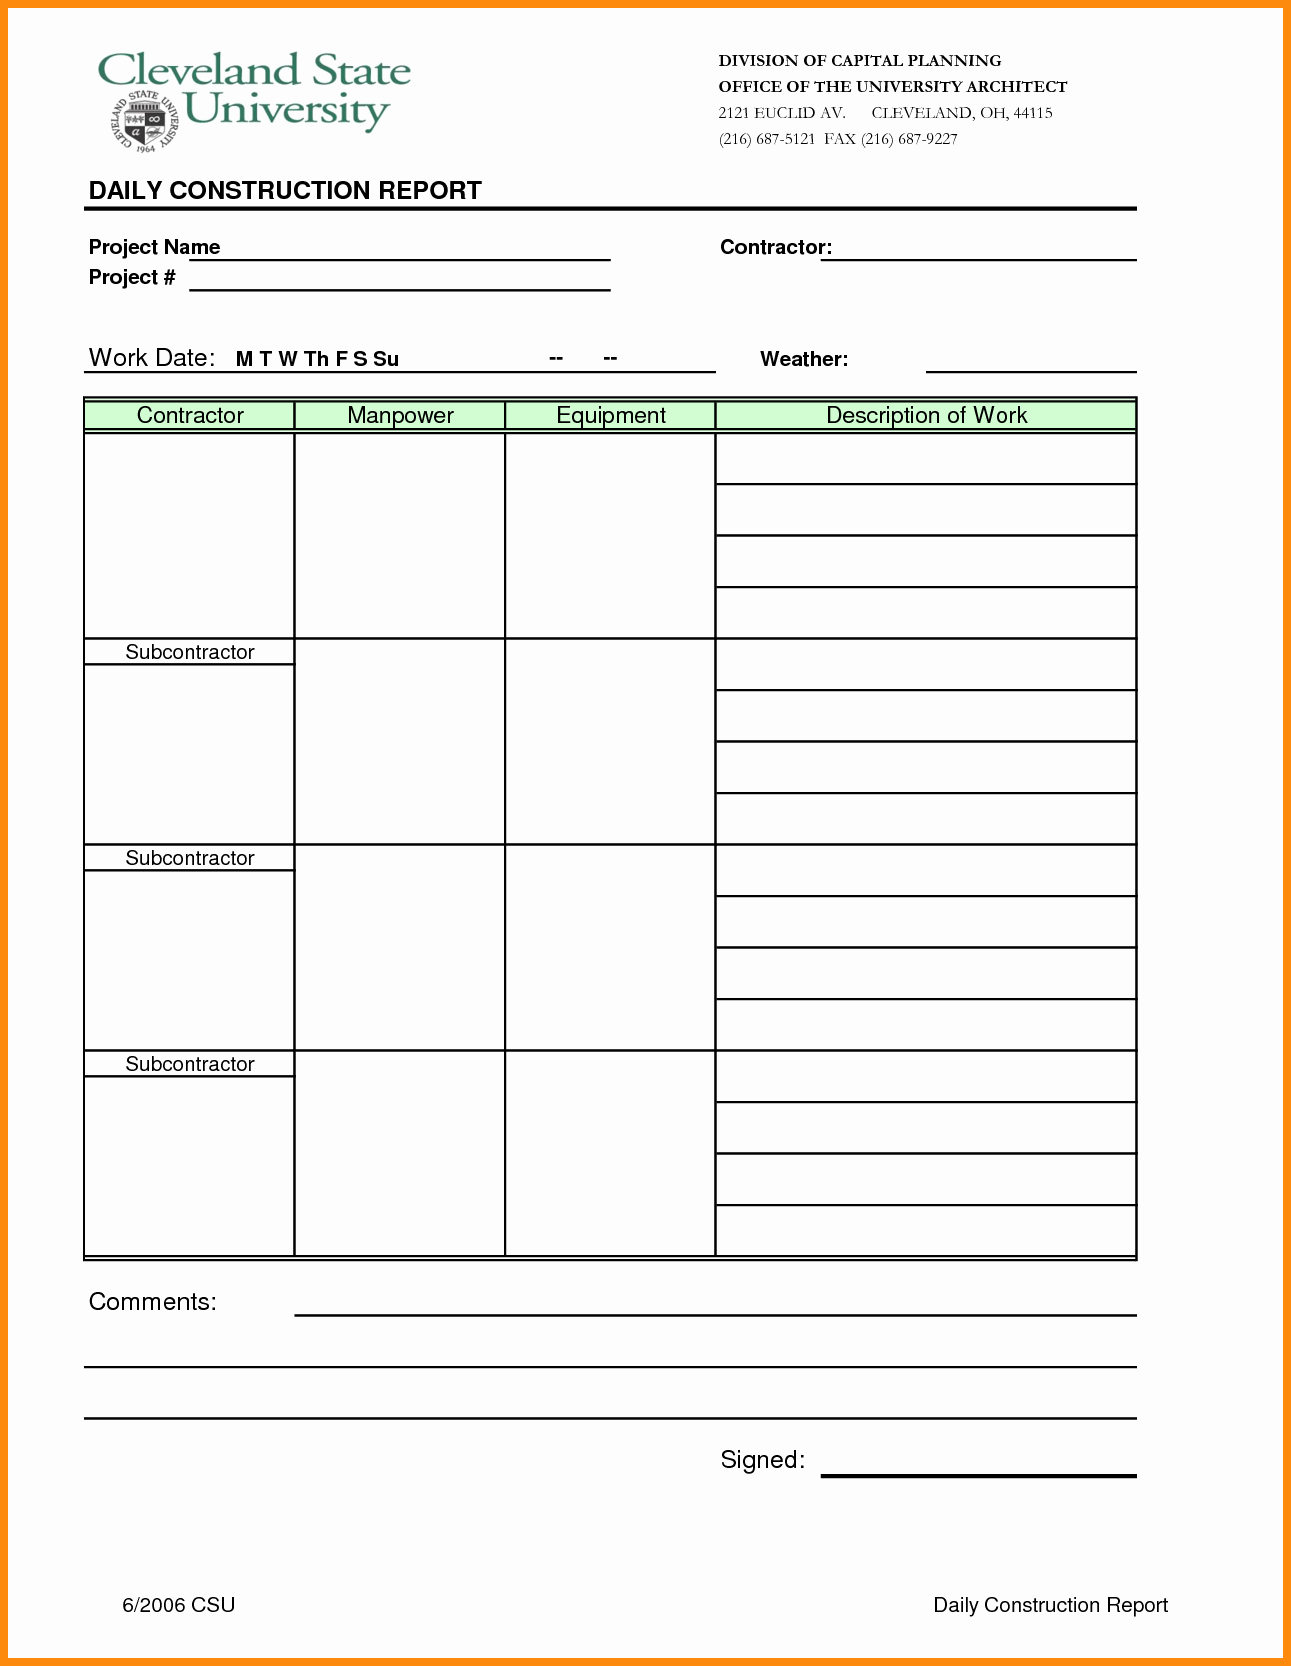 Daily Construction Report Template Fresh Construction Daily Report Template Excel